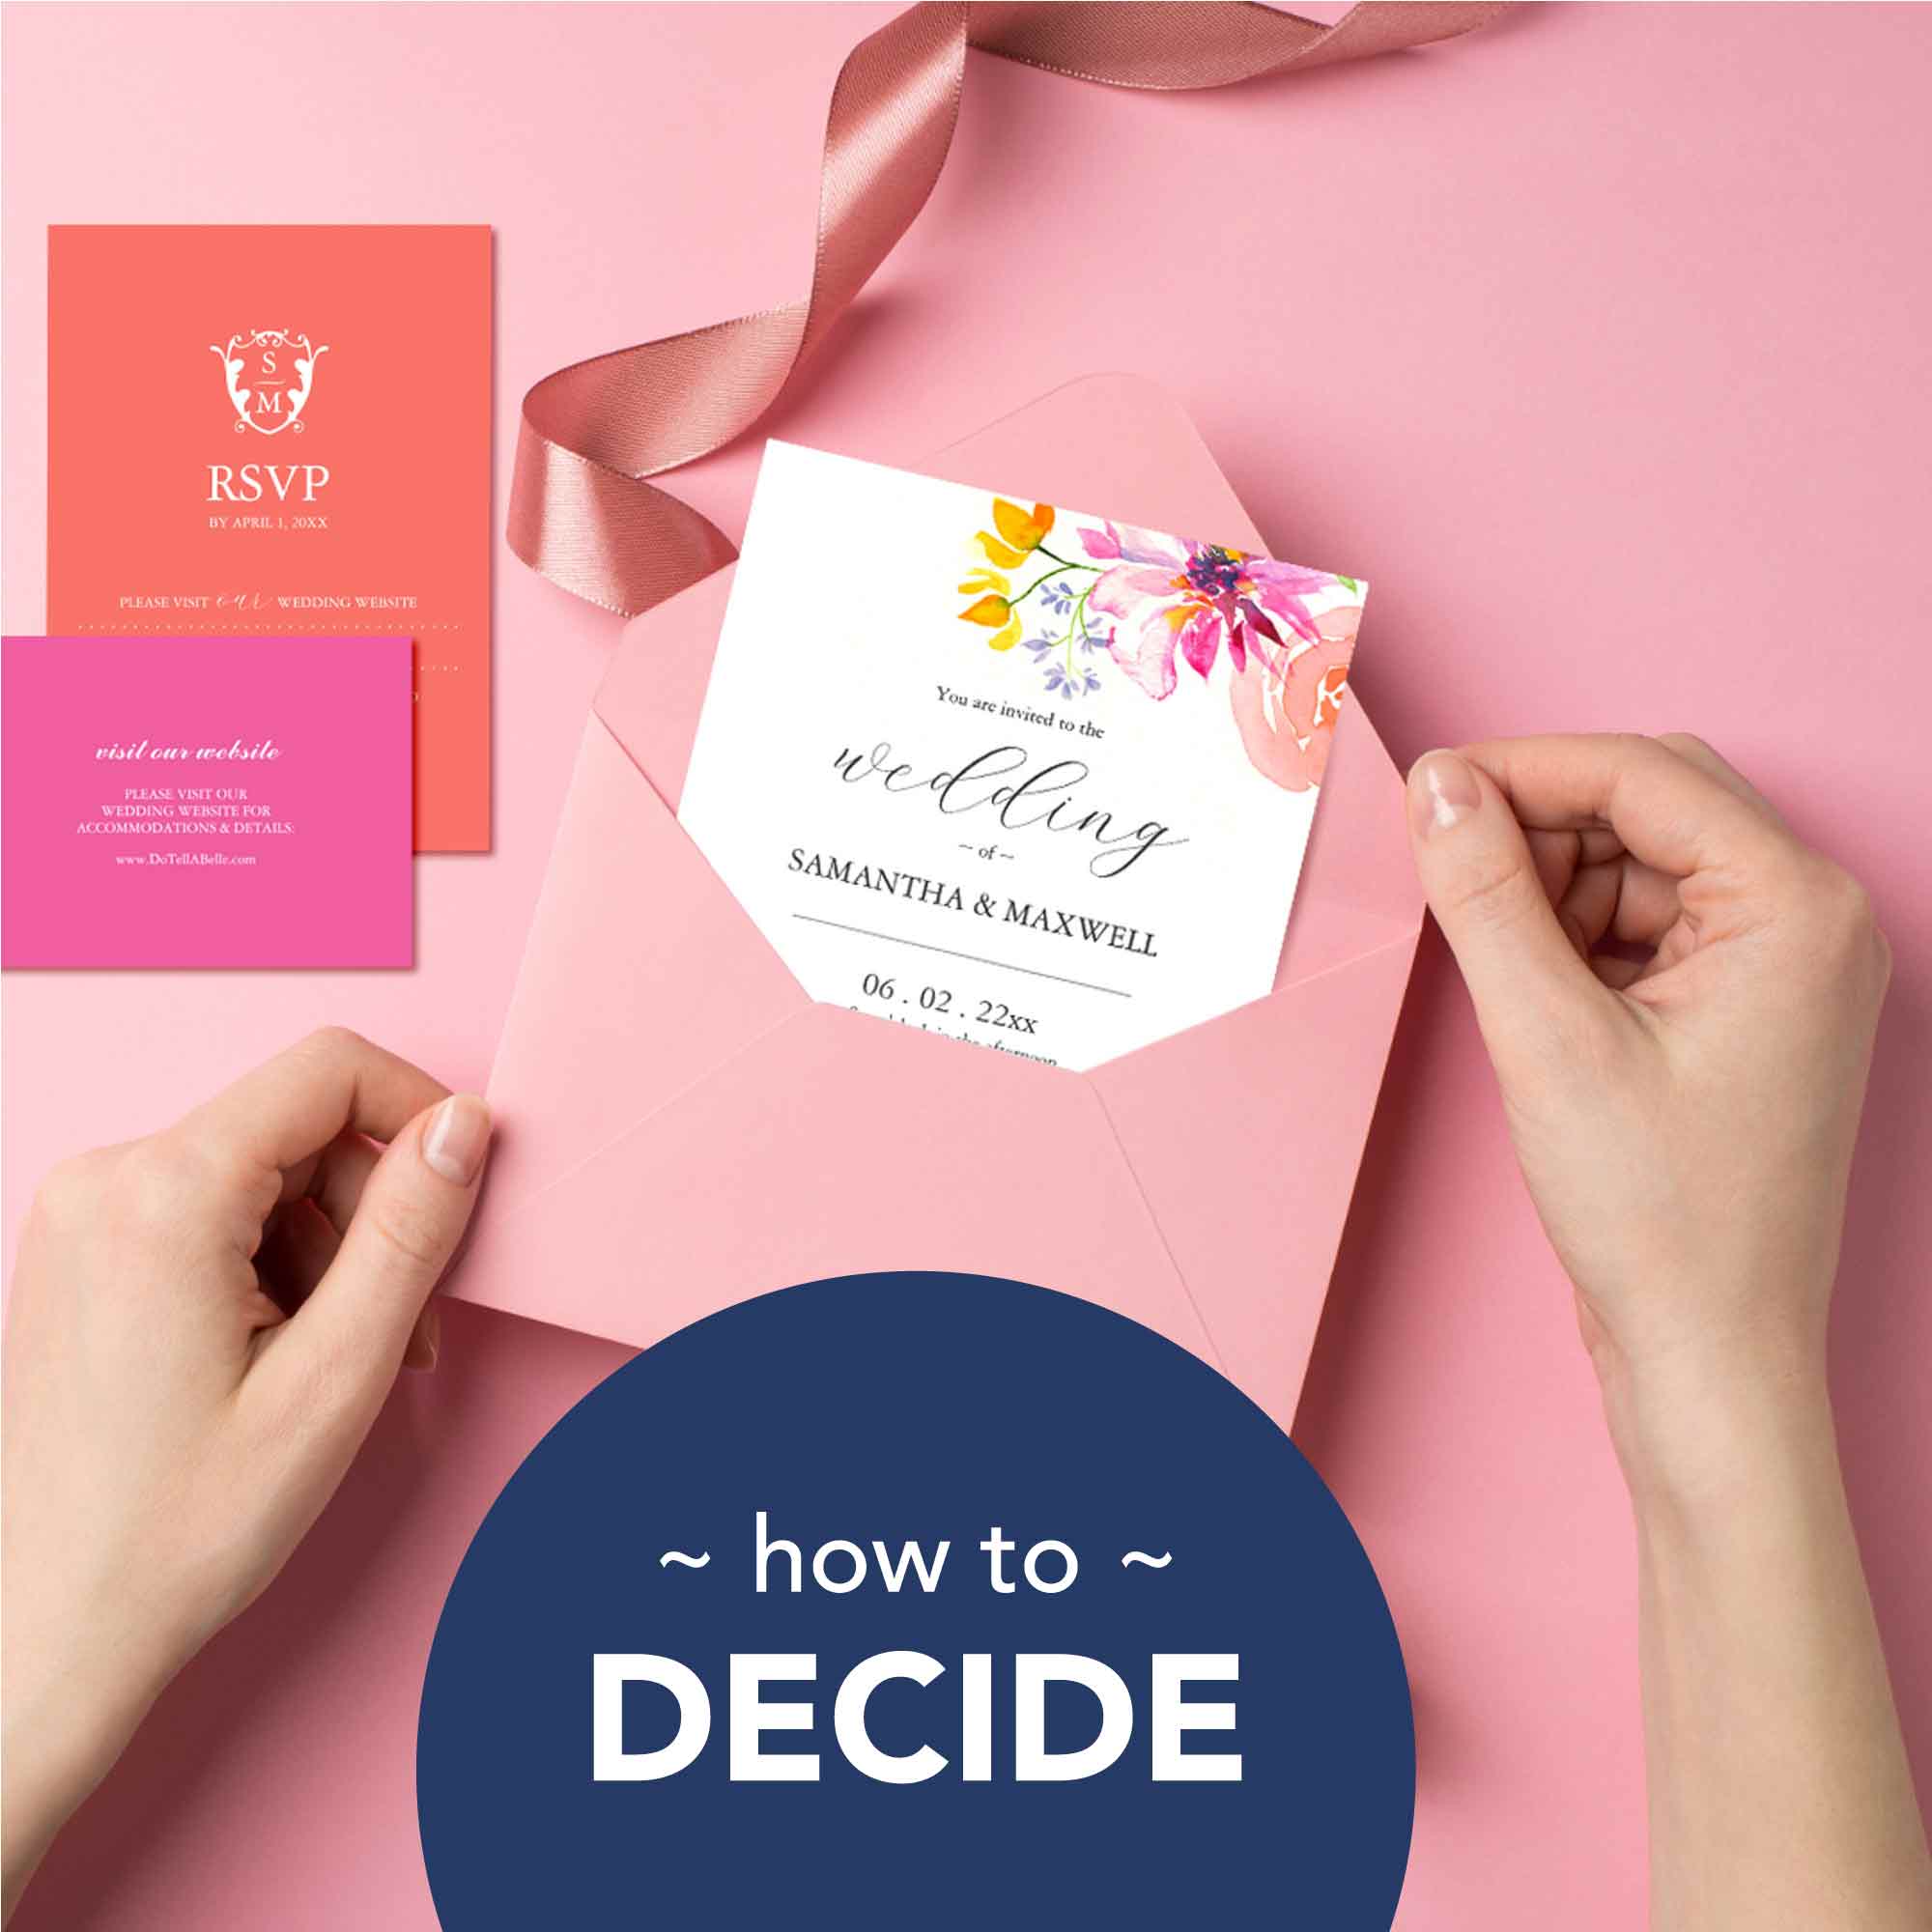 Whose name goes first on a wedding invitation. How to decide.